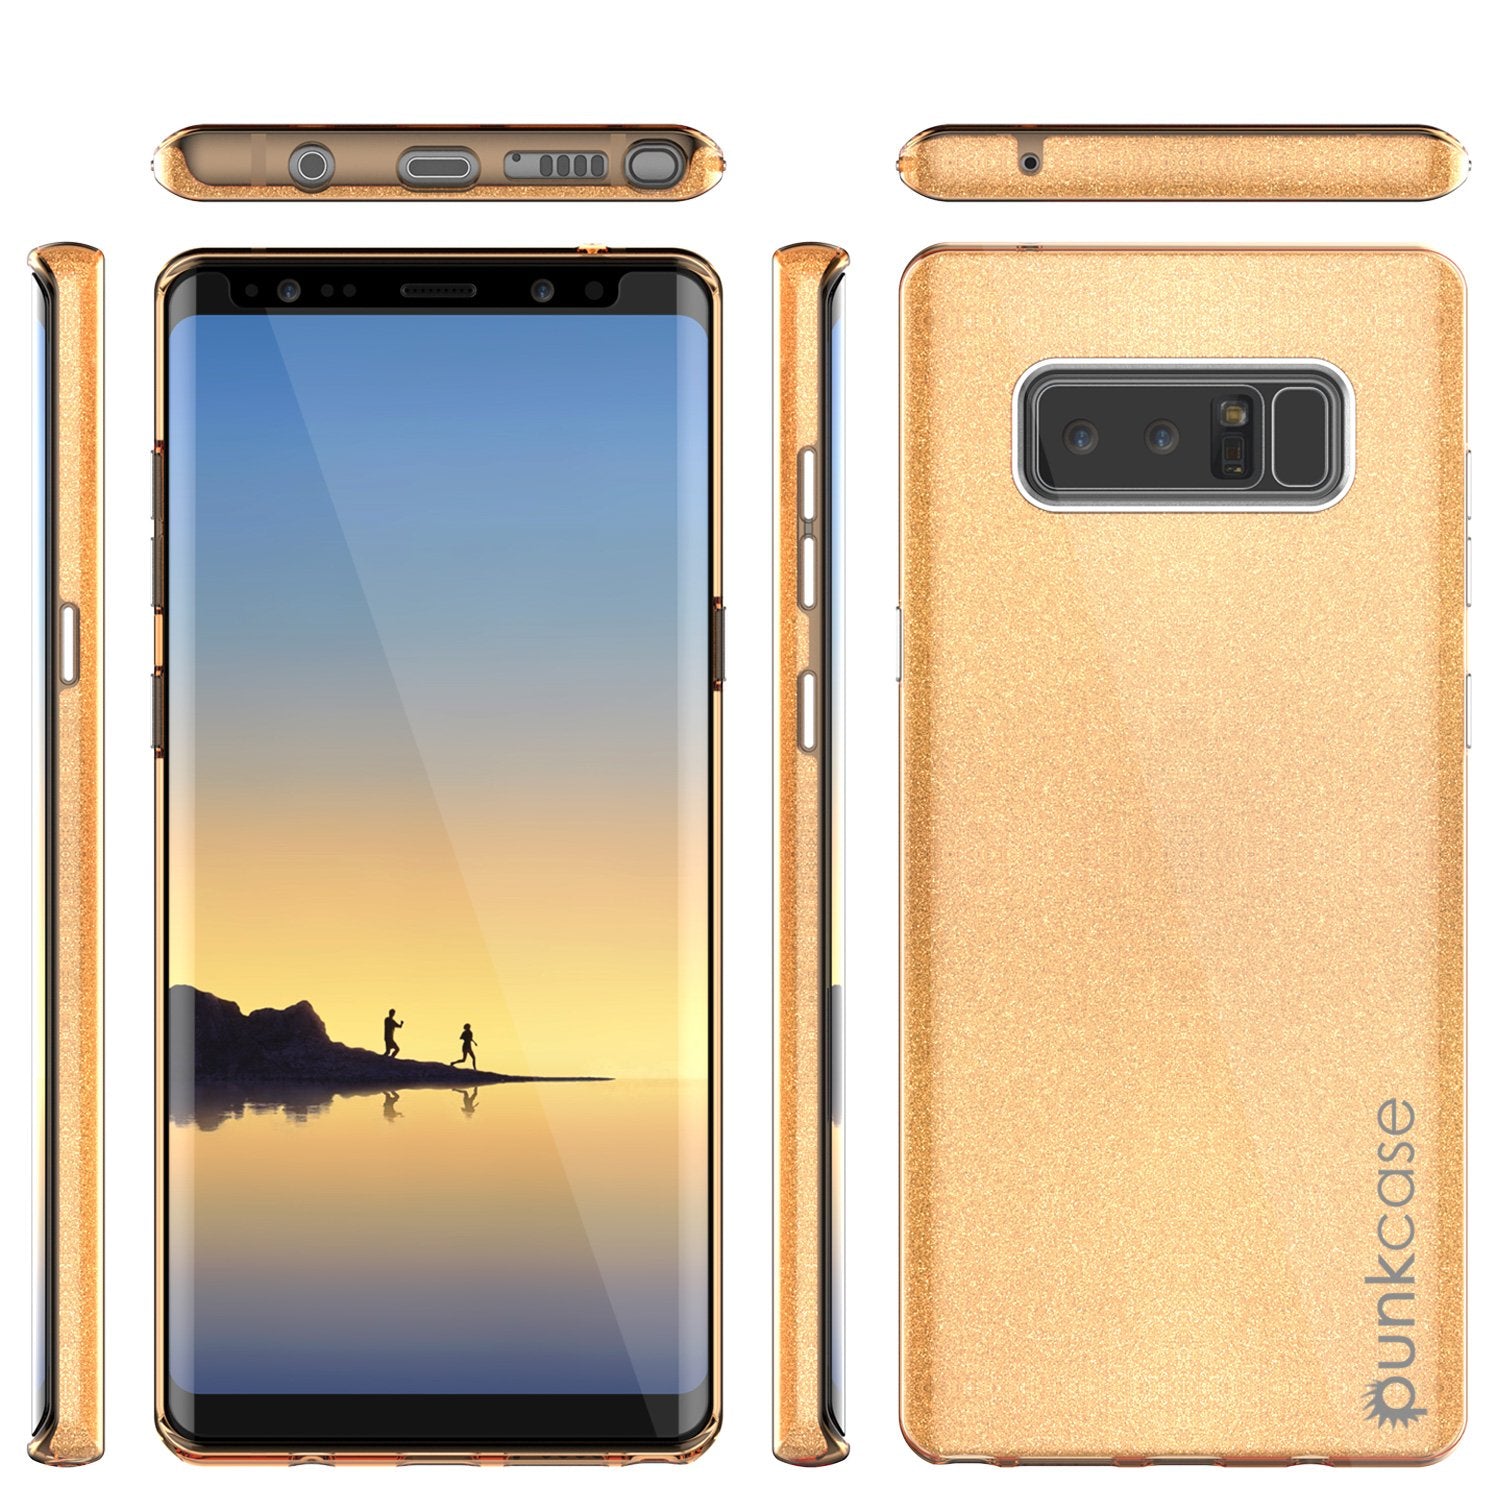 Galaxy Note 8 Ultra Slim Protective Punkcase Galactic Case [Gold]